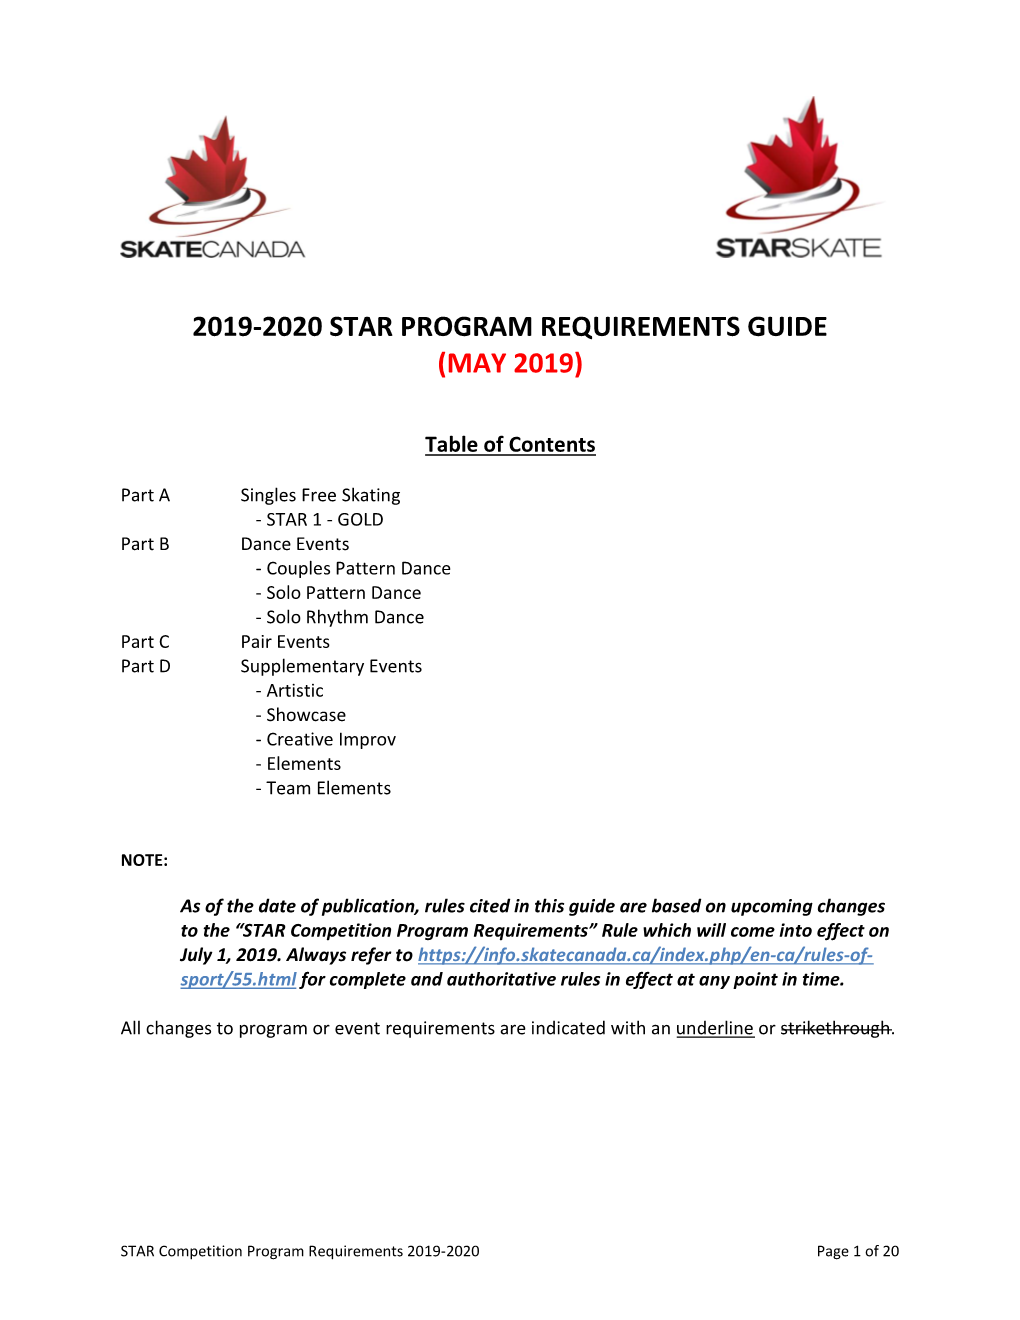 2019-2020 Star Program Requirements Guide (May 2019)